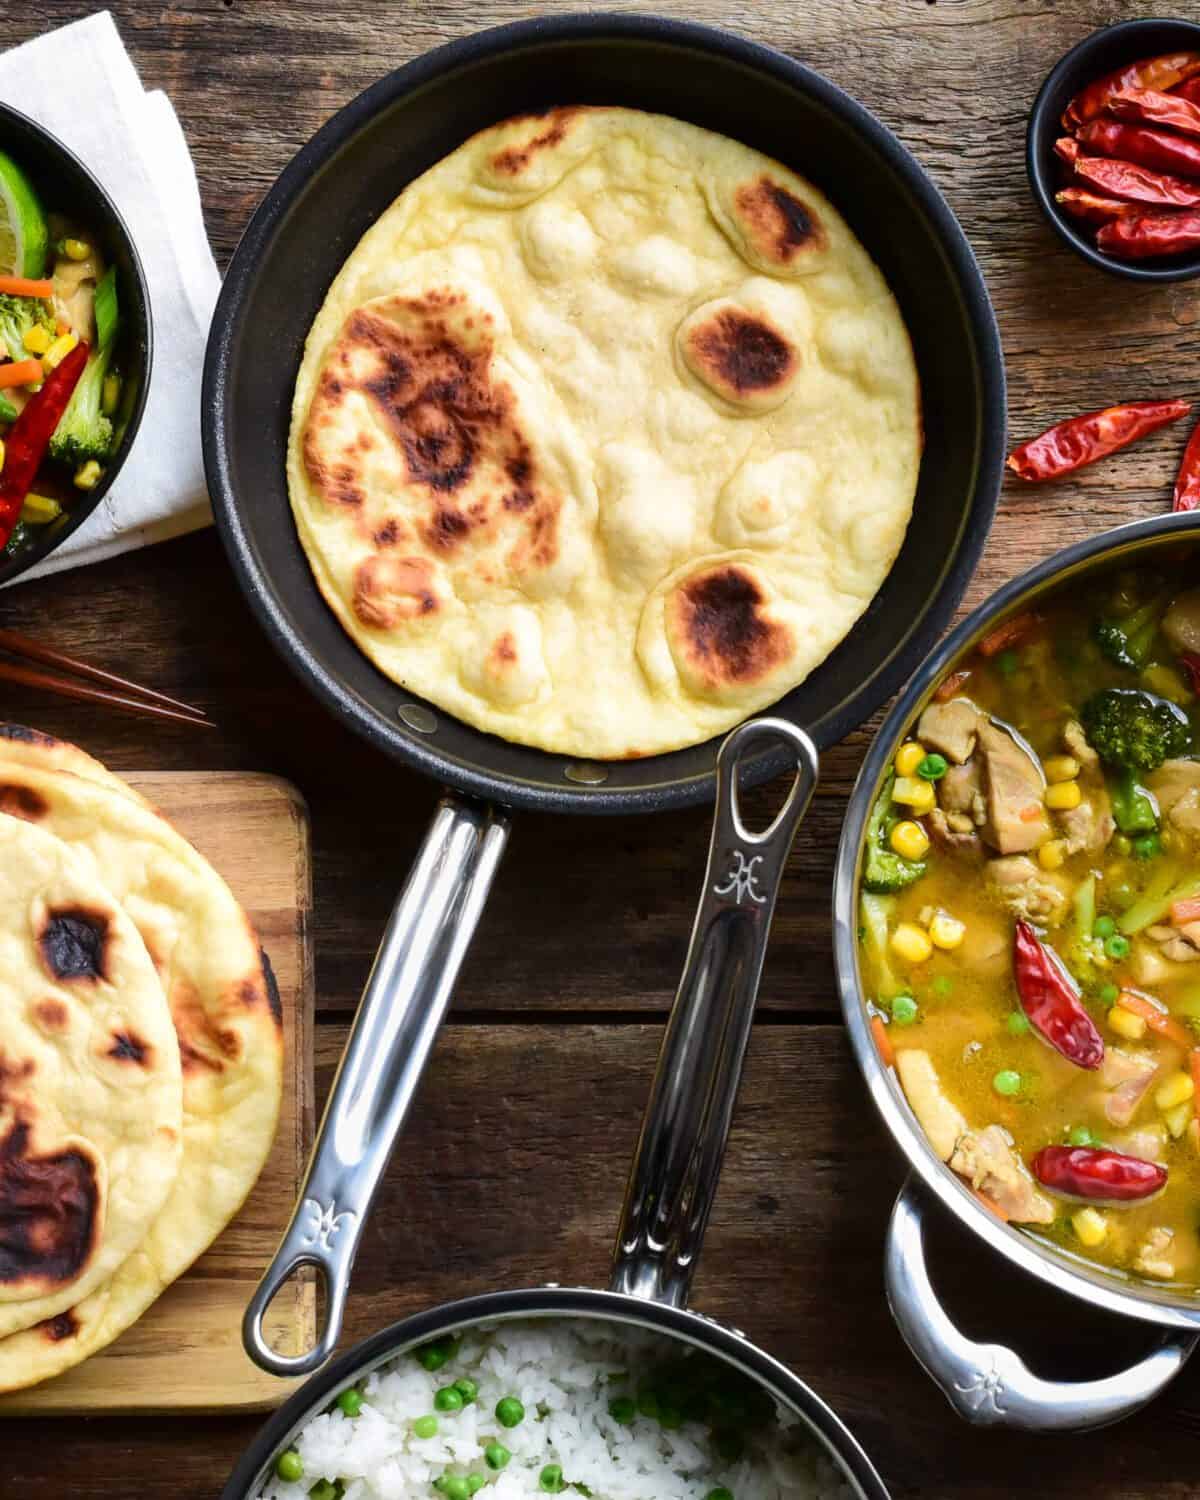 Top down image of a flatbread in a pan, a pot of Thai green curry, a pot of rice and peas and a stack of flatbread (naan).